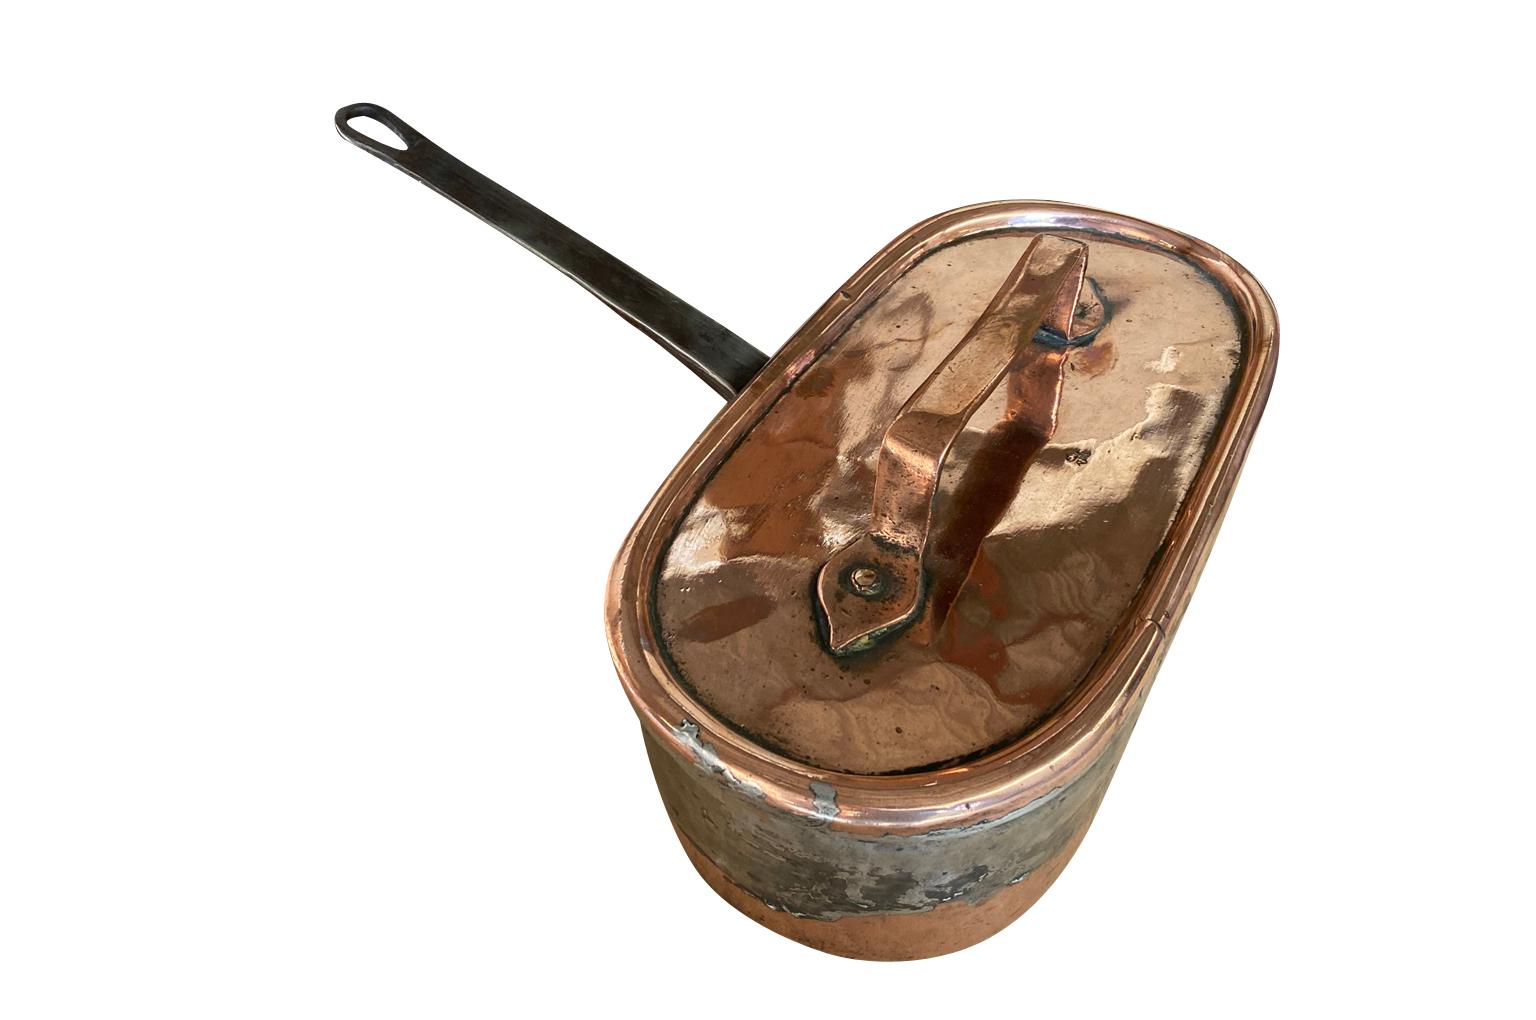 A wonderful 18th century copper pressure cooker from the Southwest of France.  A great addition to any copperware collection. 